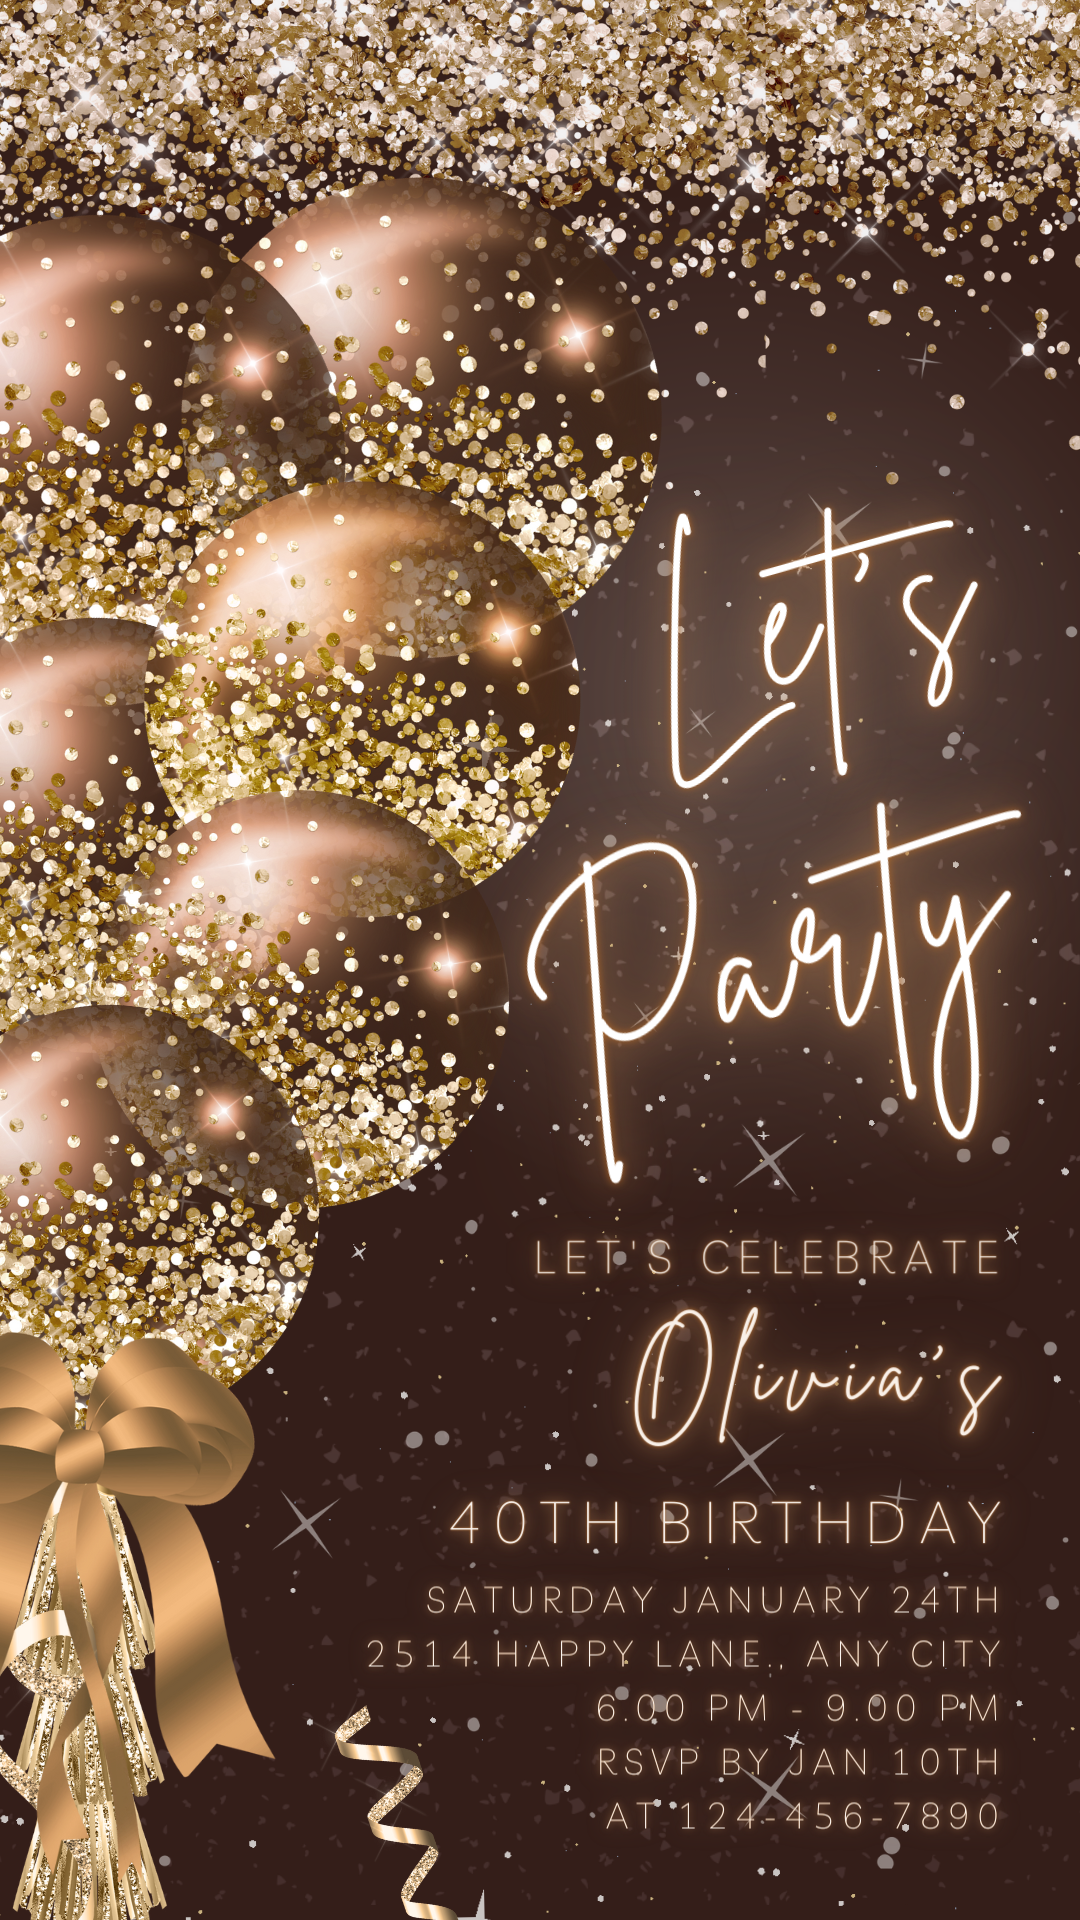 Animated Let's Party invitation, Golden Glittery Dance Night Invite for any Event Celebration, Editable Video Birthday Template